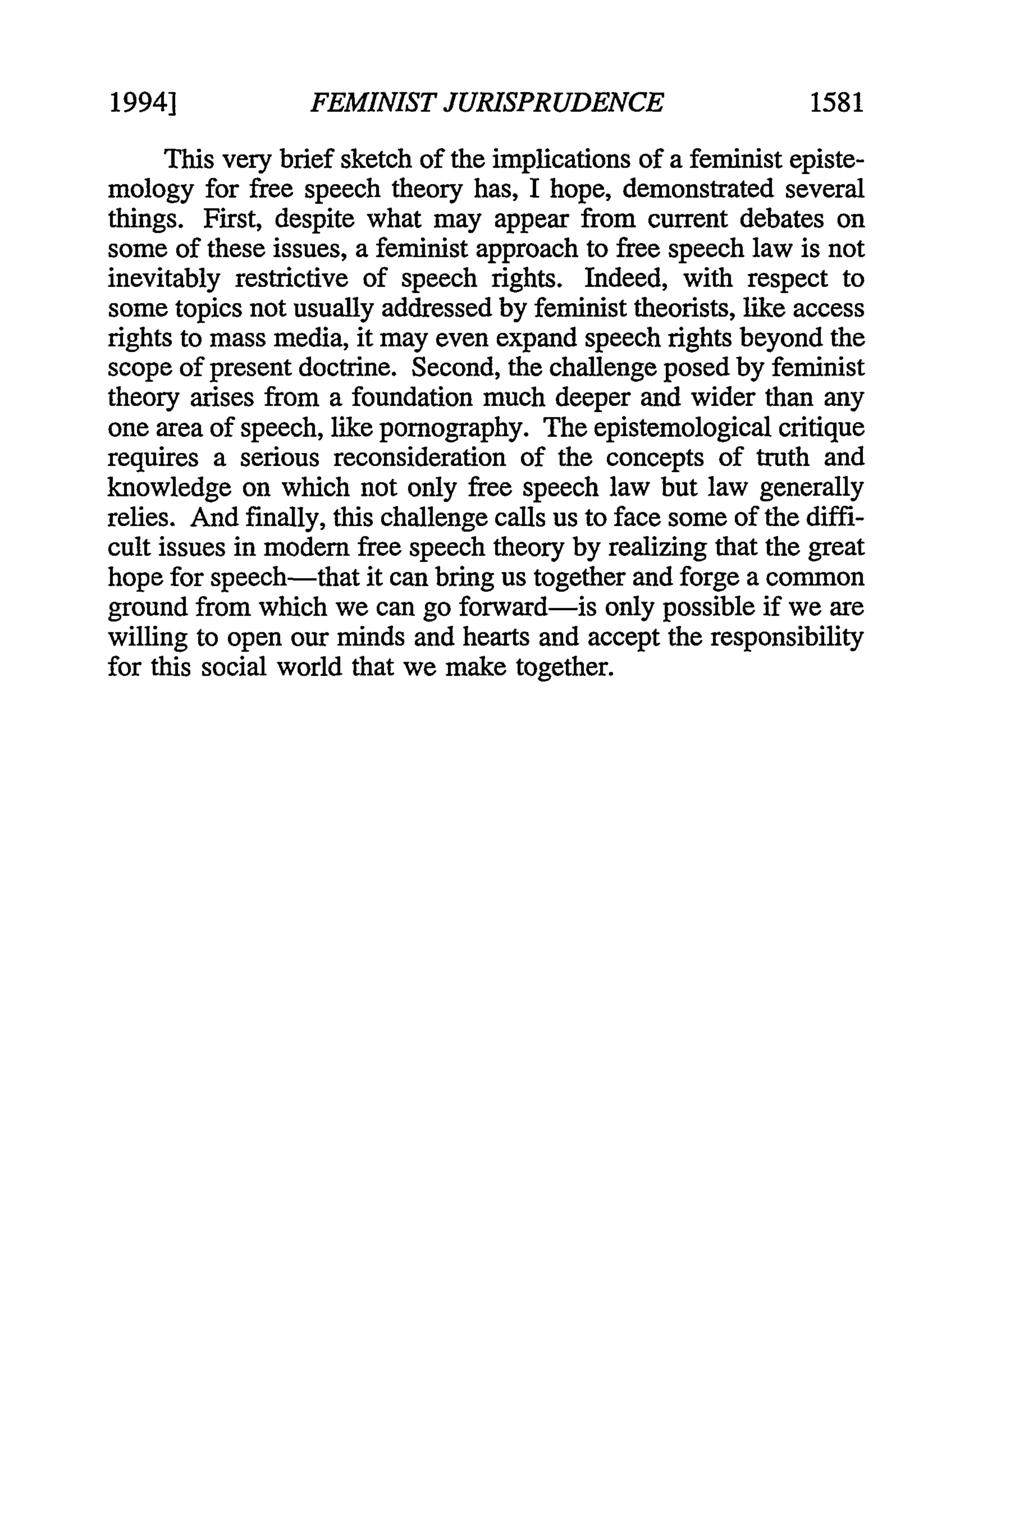 1994] FEMINIST JURISPRUDENCE 1581 This very brief sketch of the implications of a feminist epistemology for free speech theory has, I hope, demonstrated several things.